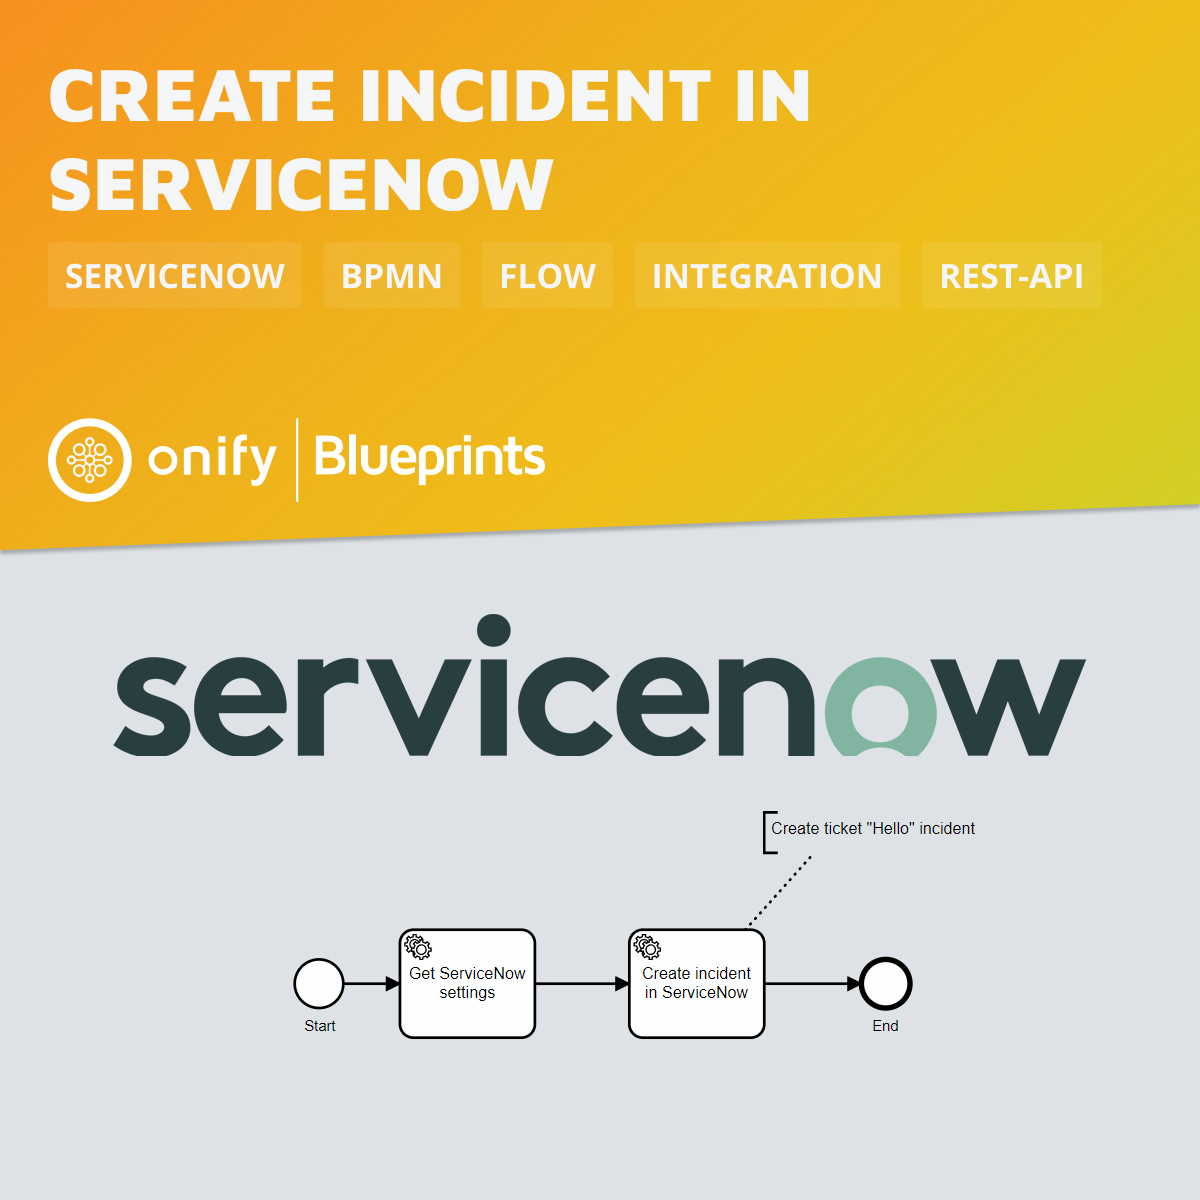 Onify Blueprint – Create incident in ServiceNow